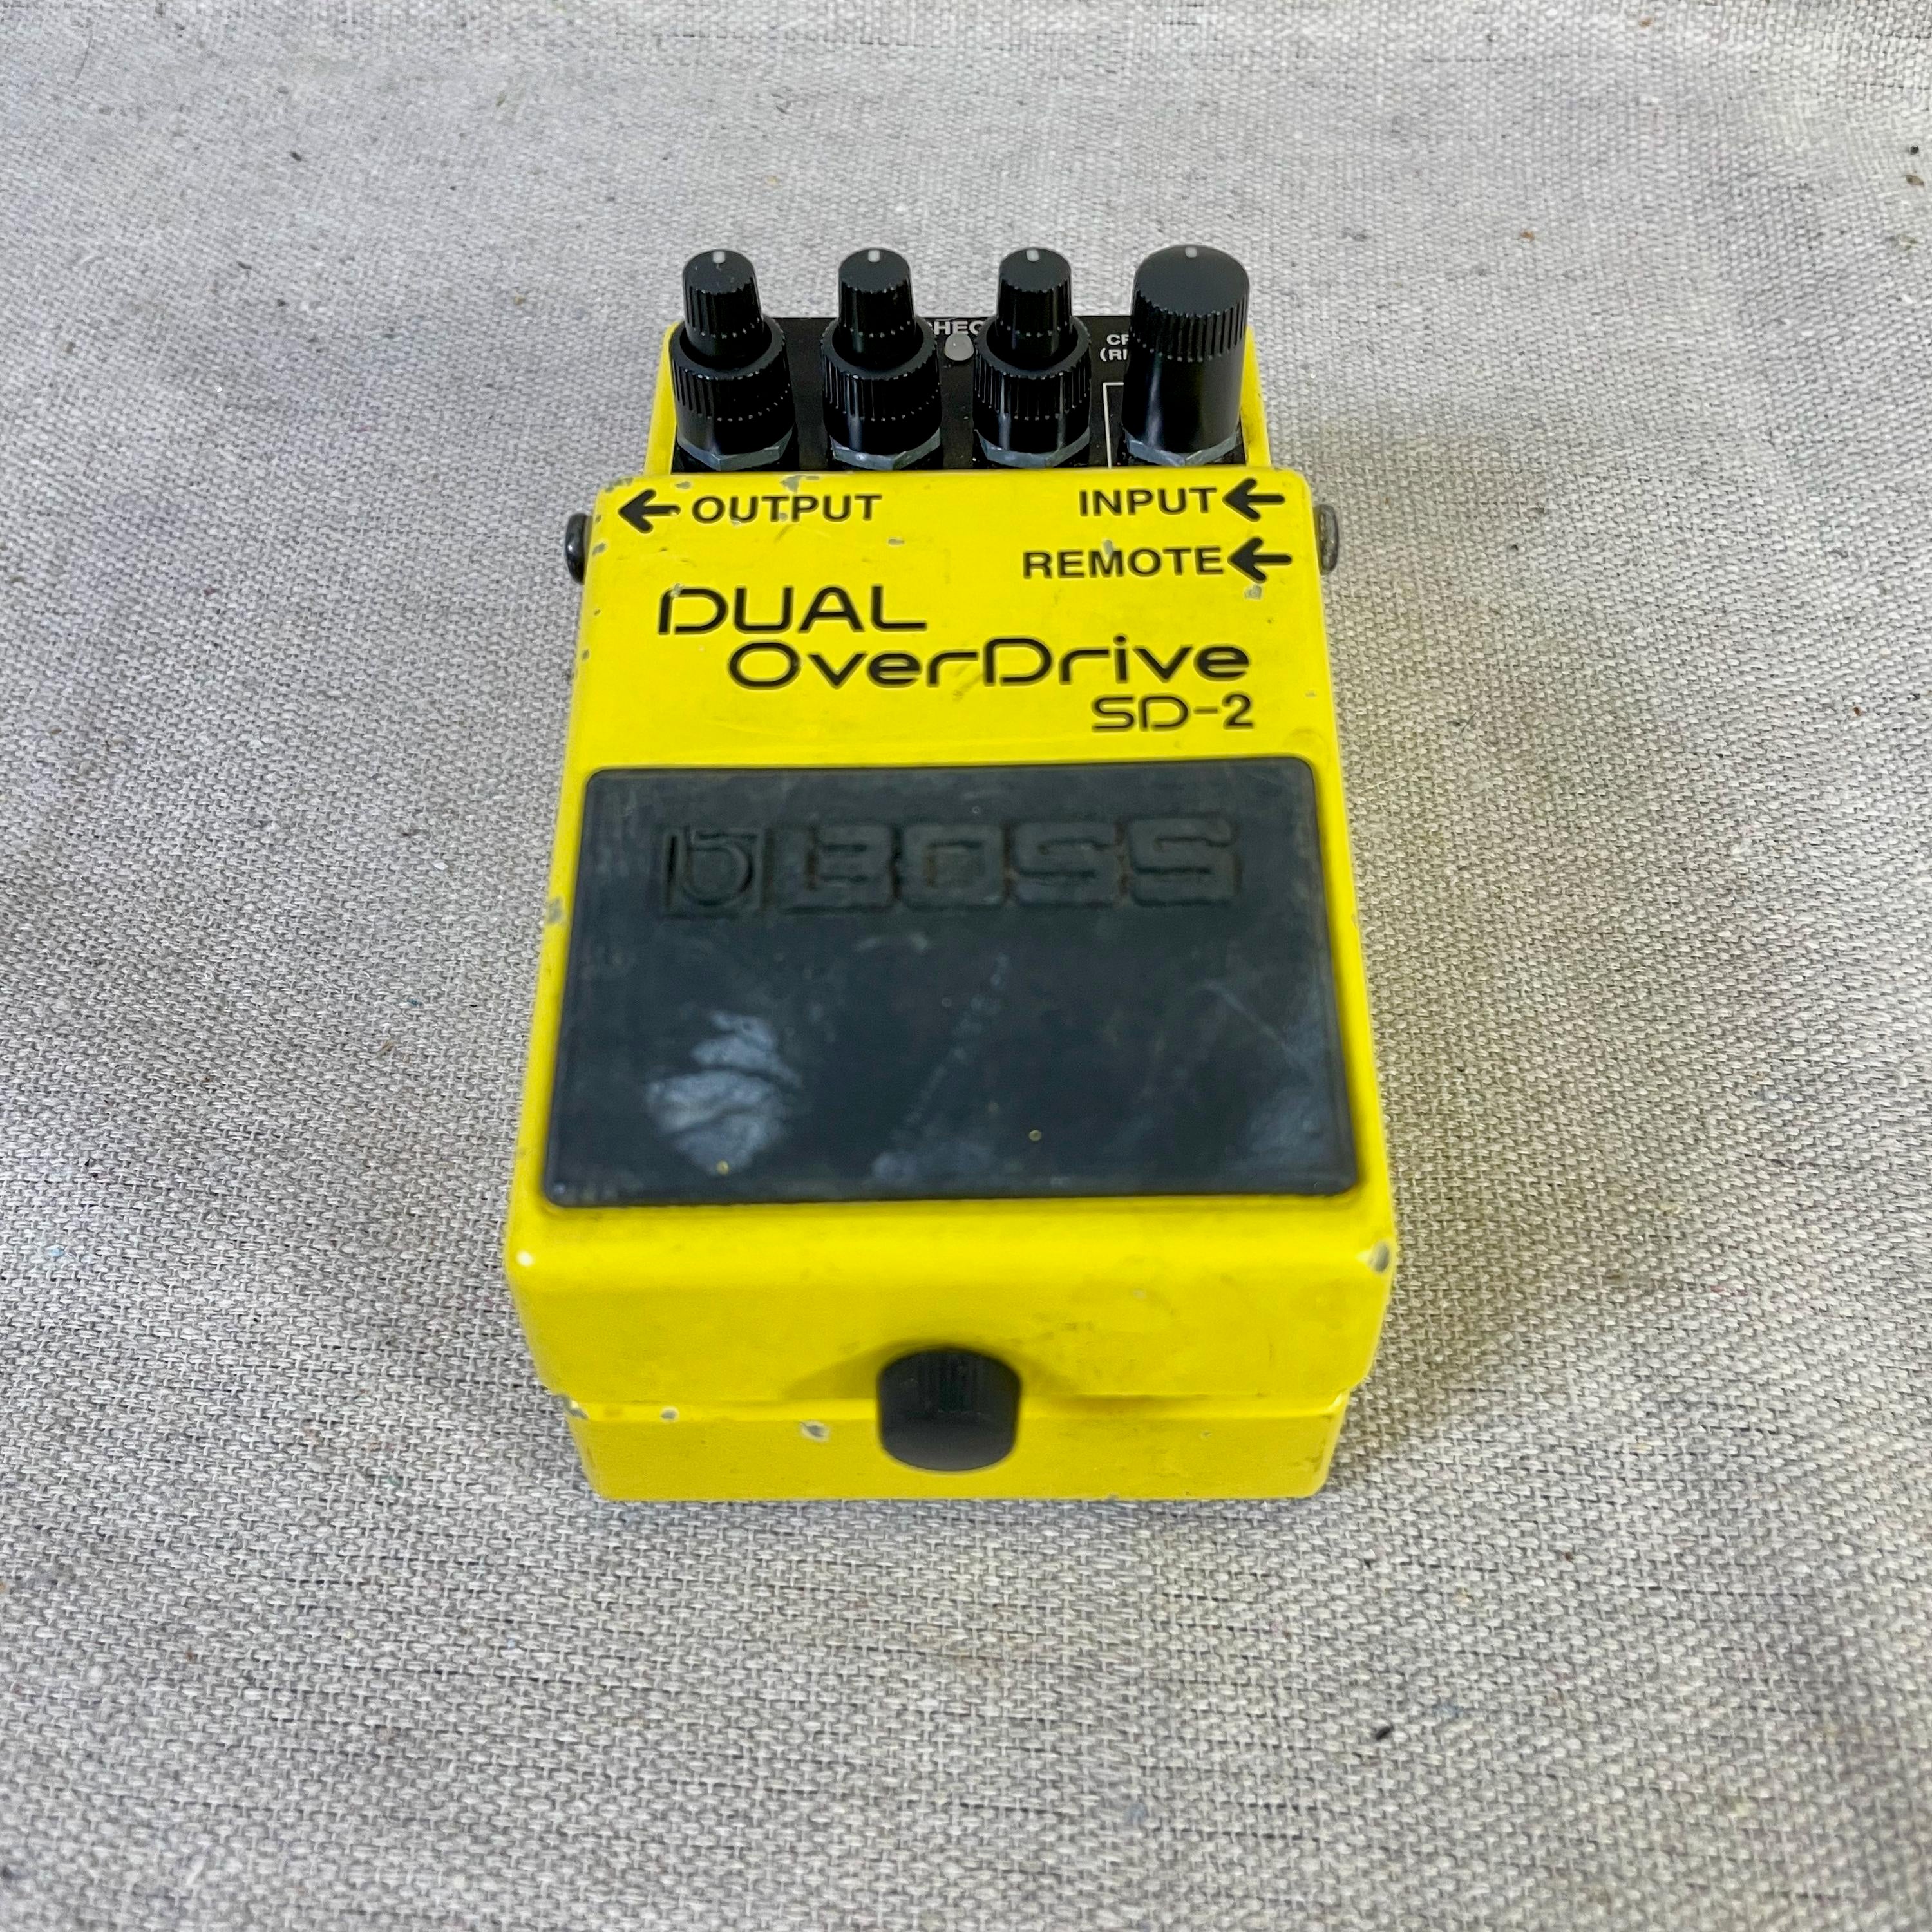 Used Boss SD-2 Dual OverDrive Silver Label 1993 Yellow Guitar Pedal